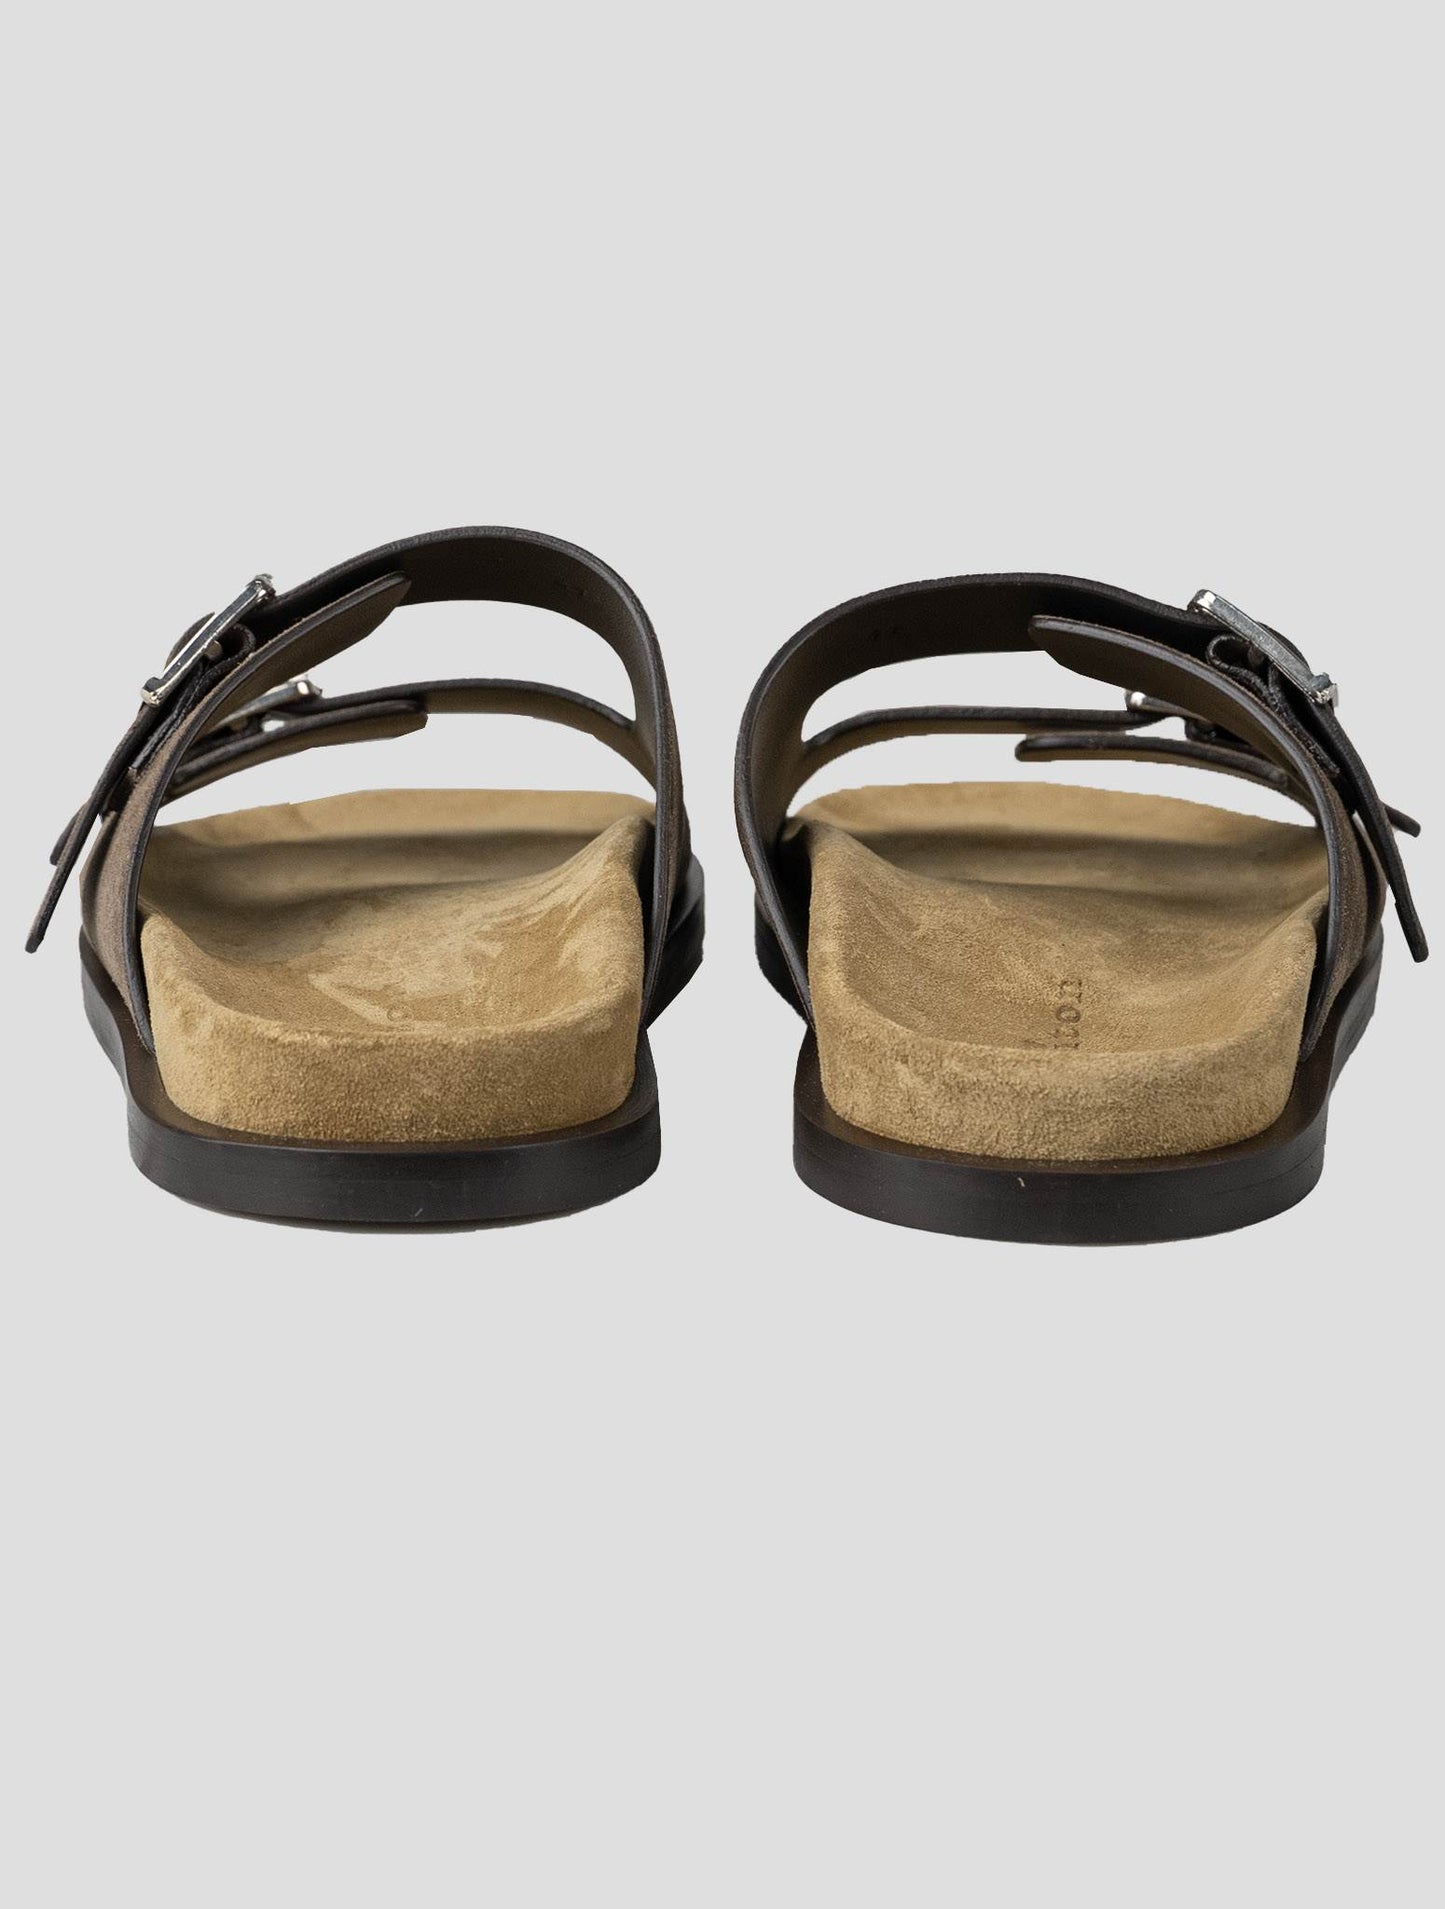 Kiton Brown Leather Suede Sandals